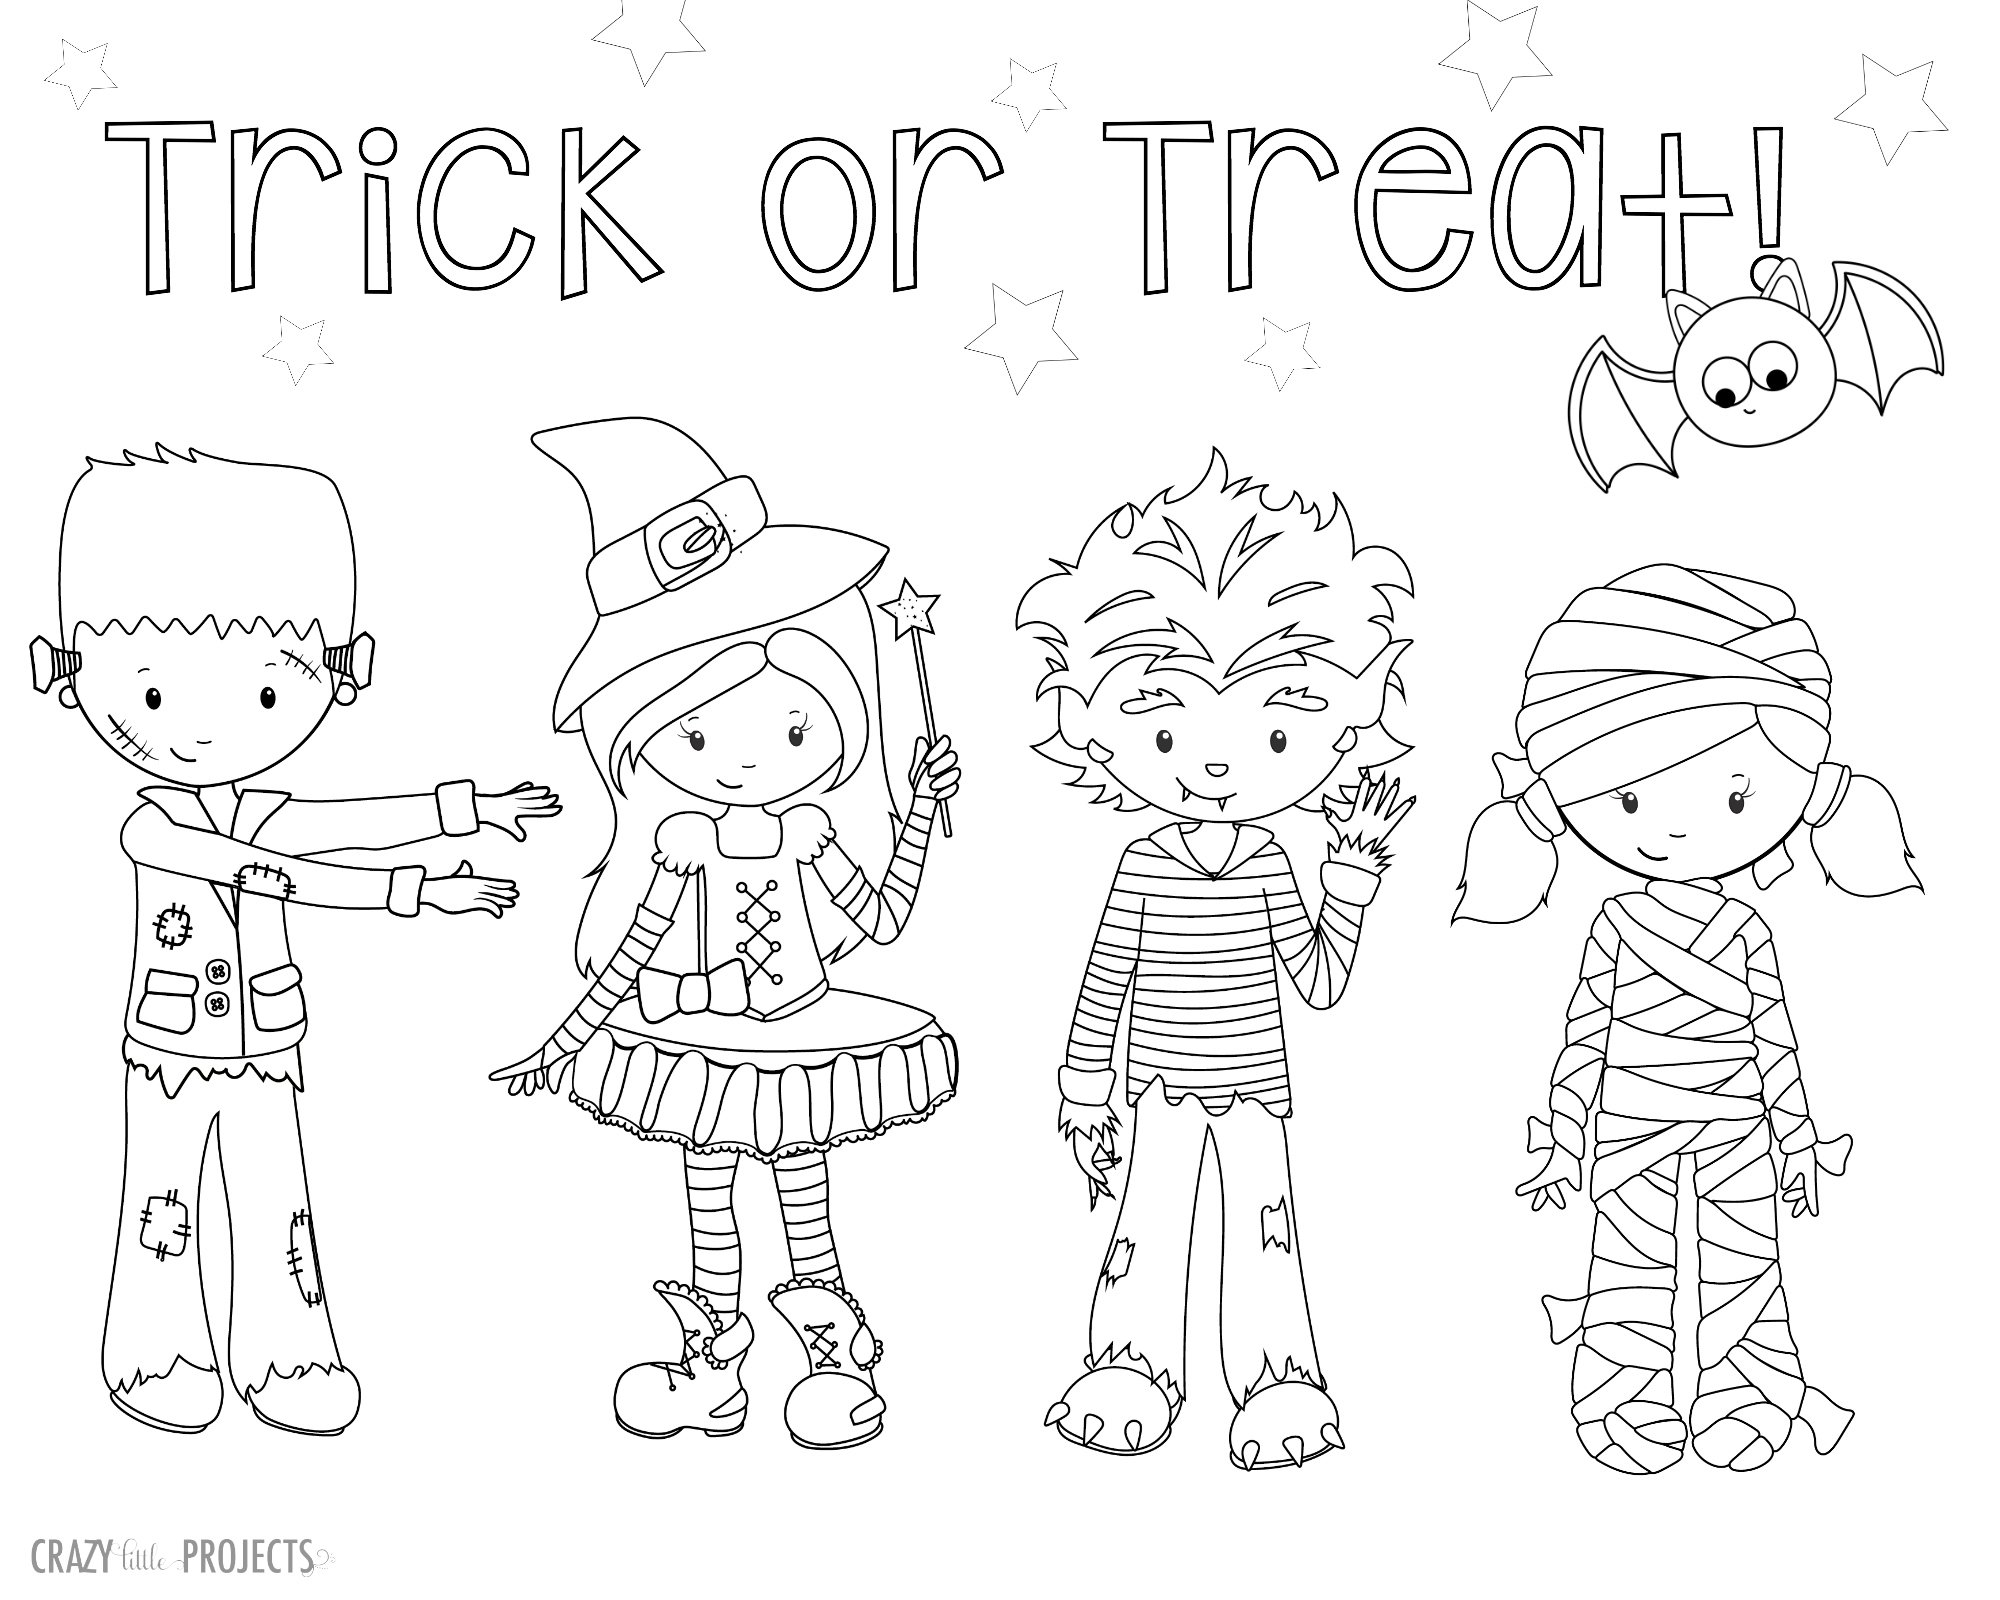 Cute Free Printable Halloween Coloring Pages - Crazy Little Projects